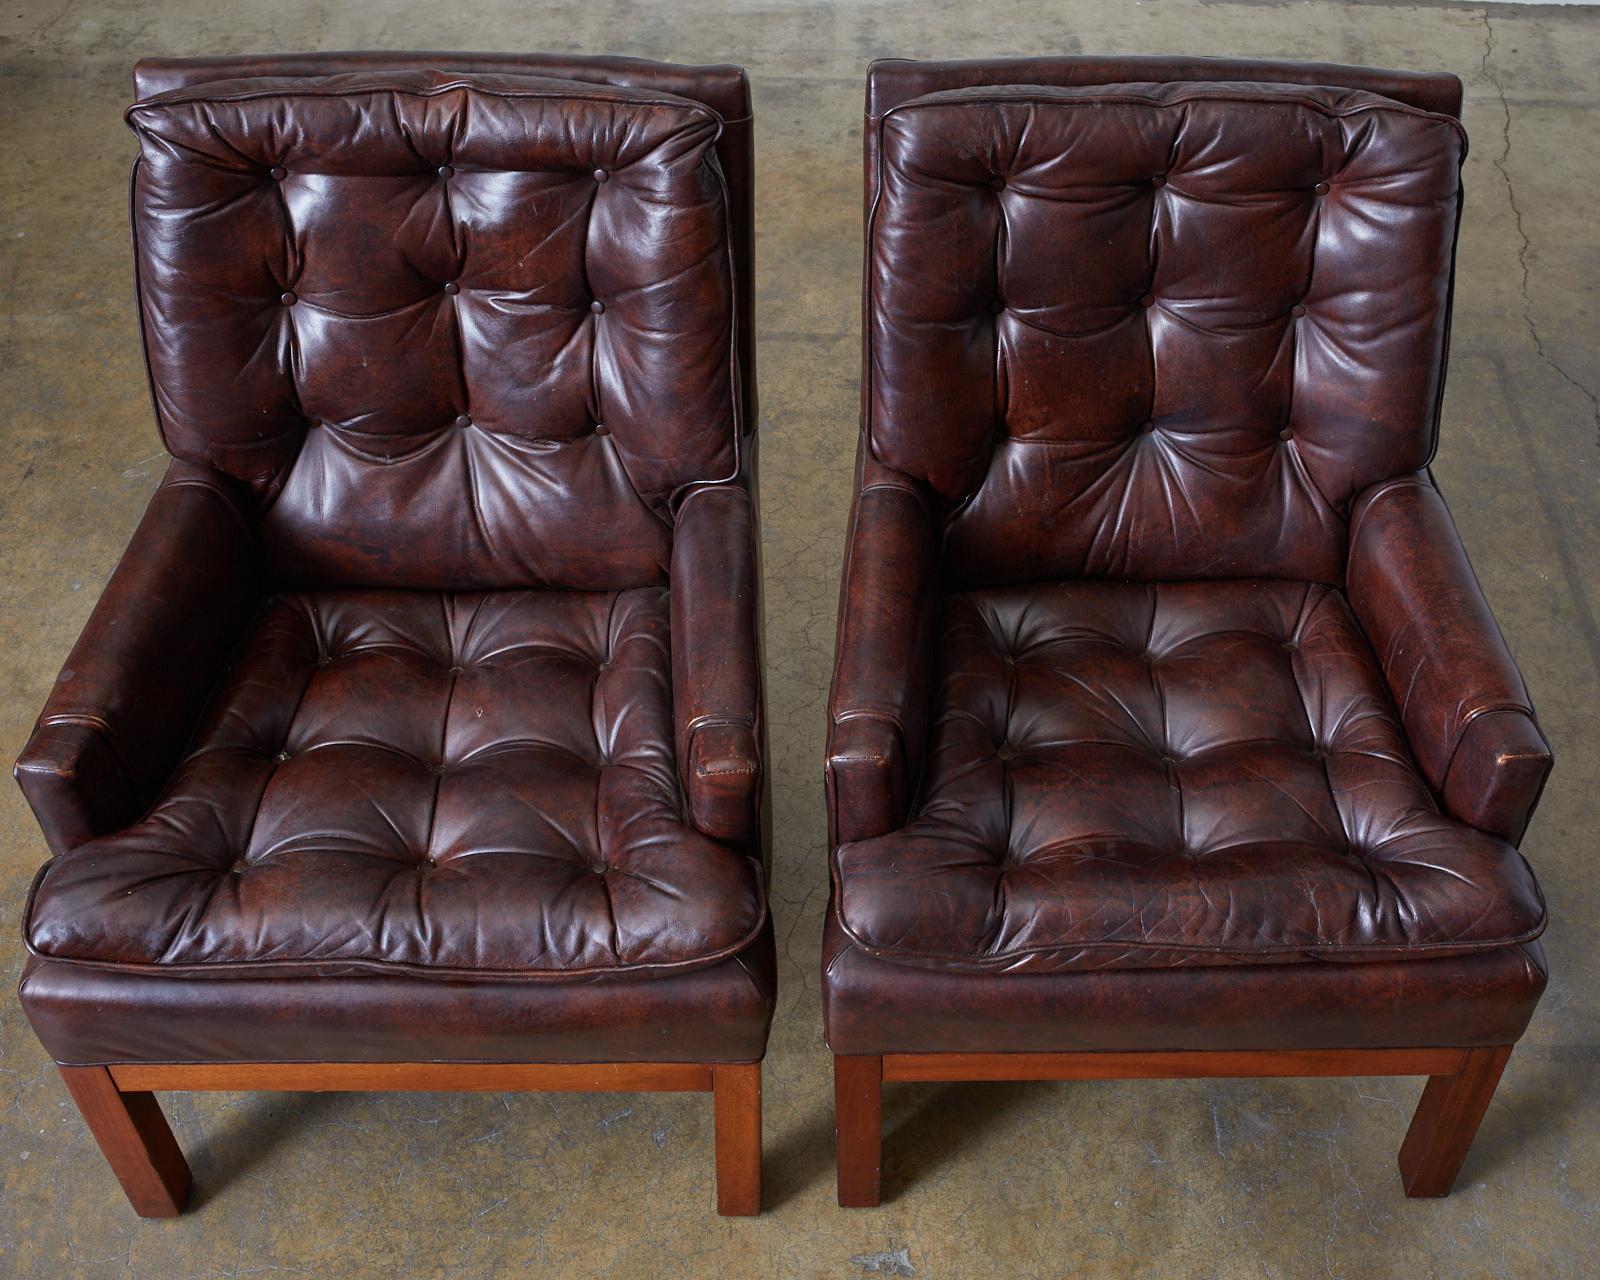 Wood Pair of Midcentury Tufted Leather Library Chairs